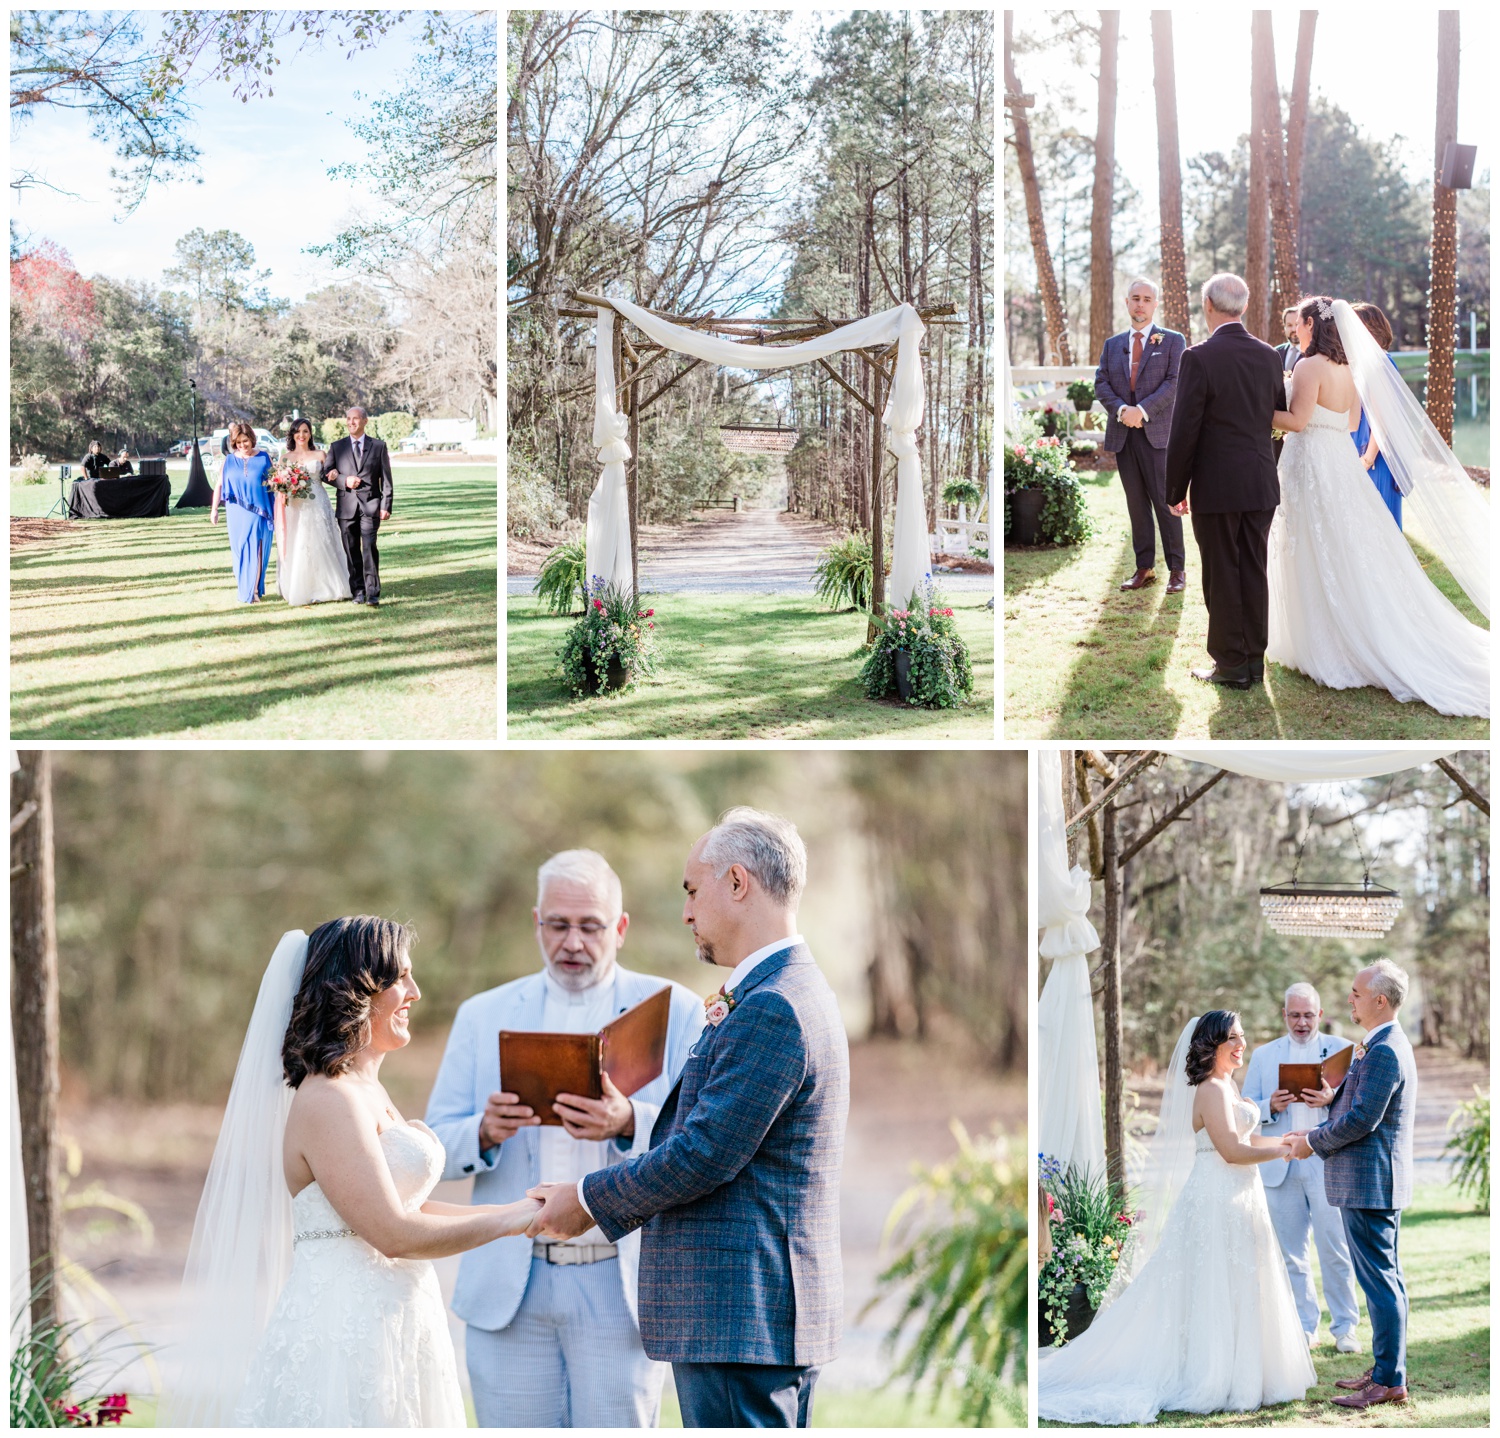 Ceremony at The Mackey House - the savannah elopement package - officiating by Reverend Steve Schulte